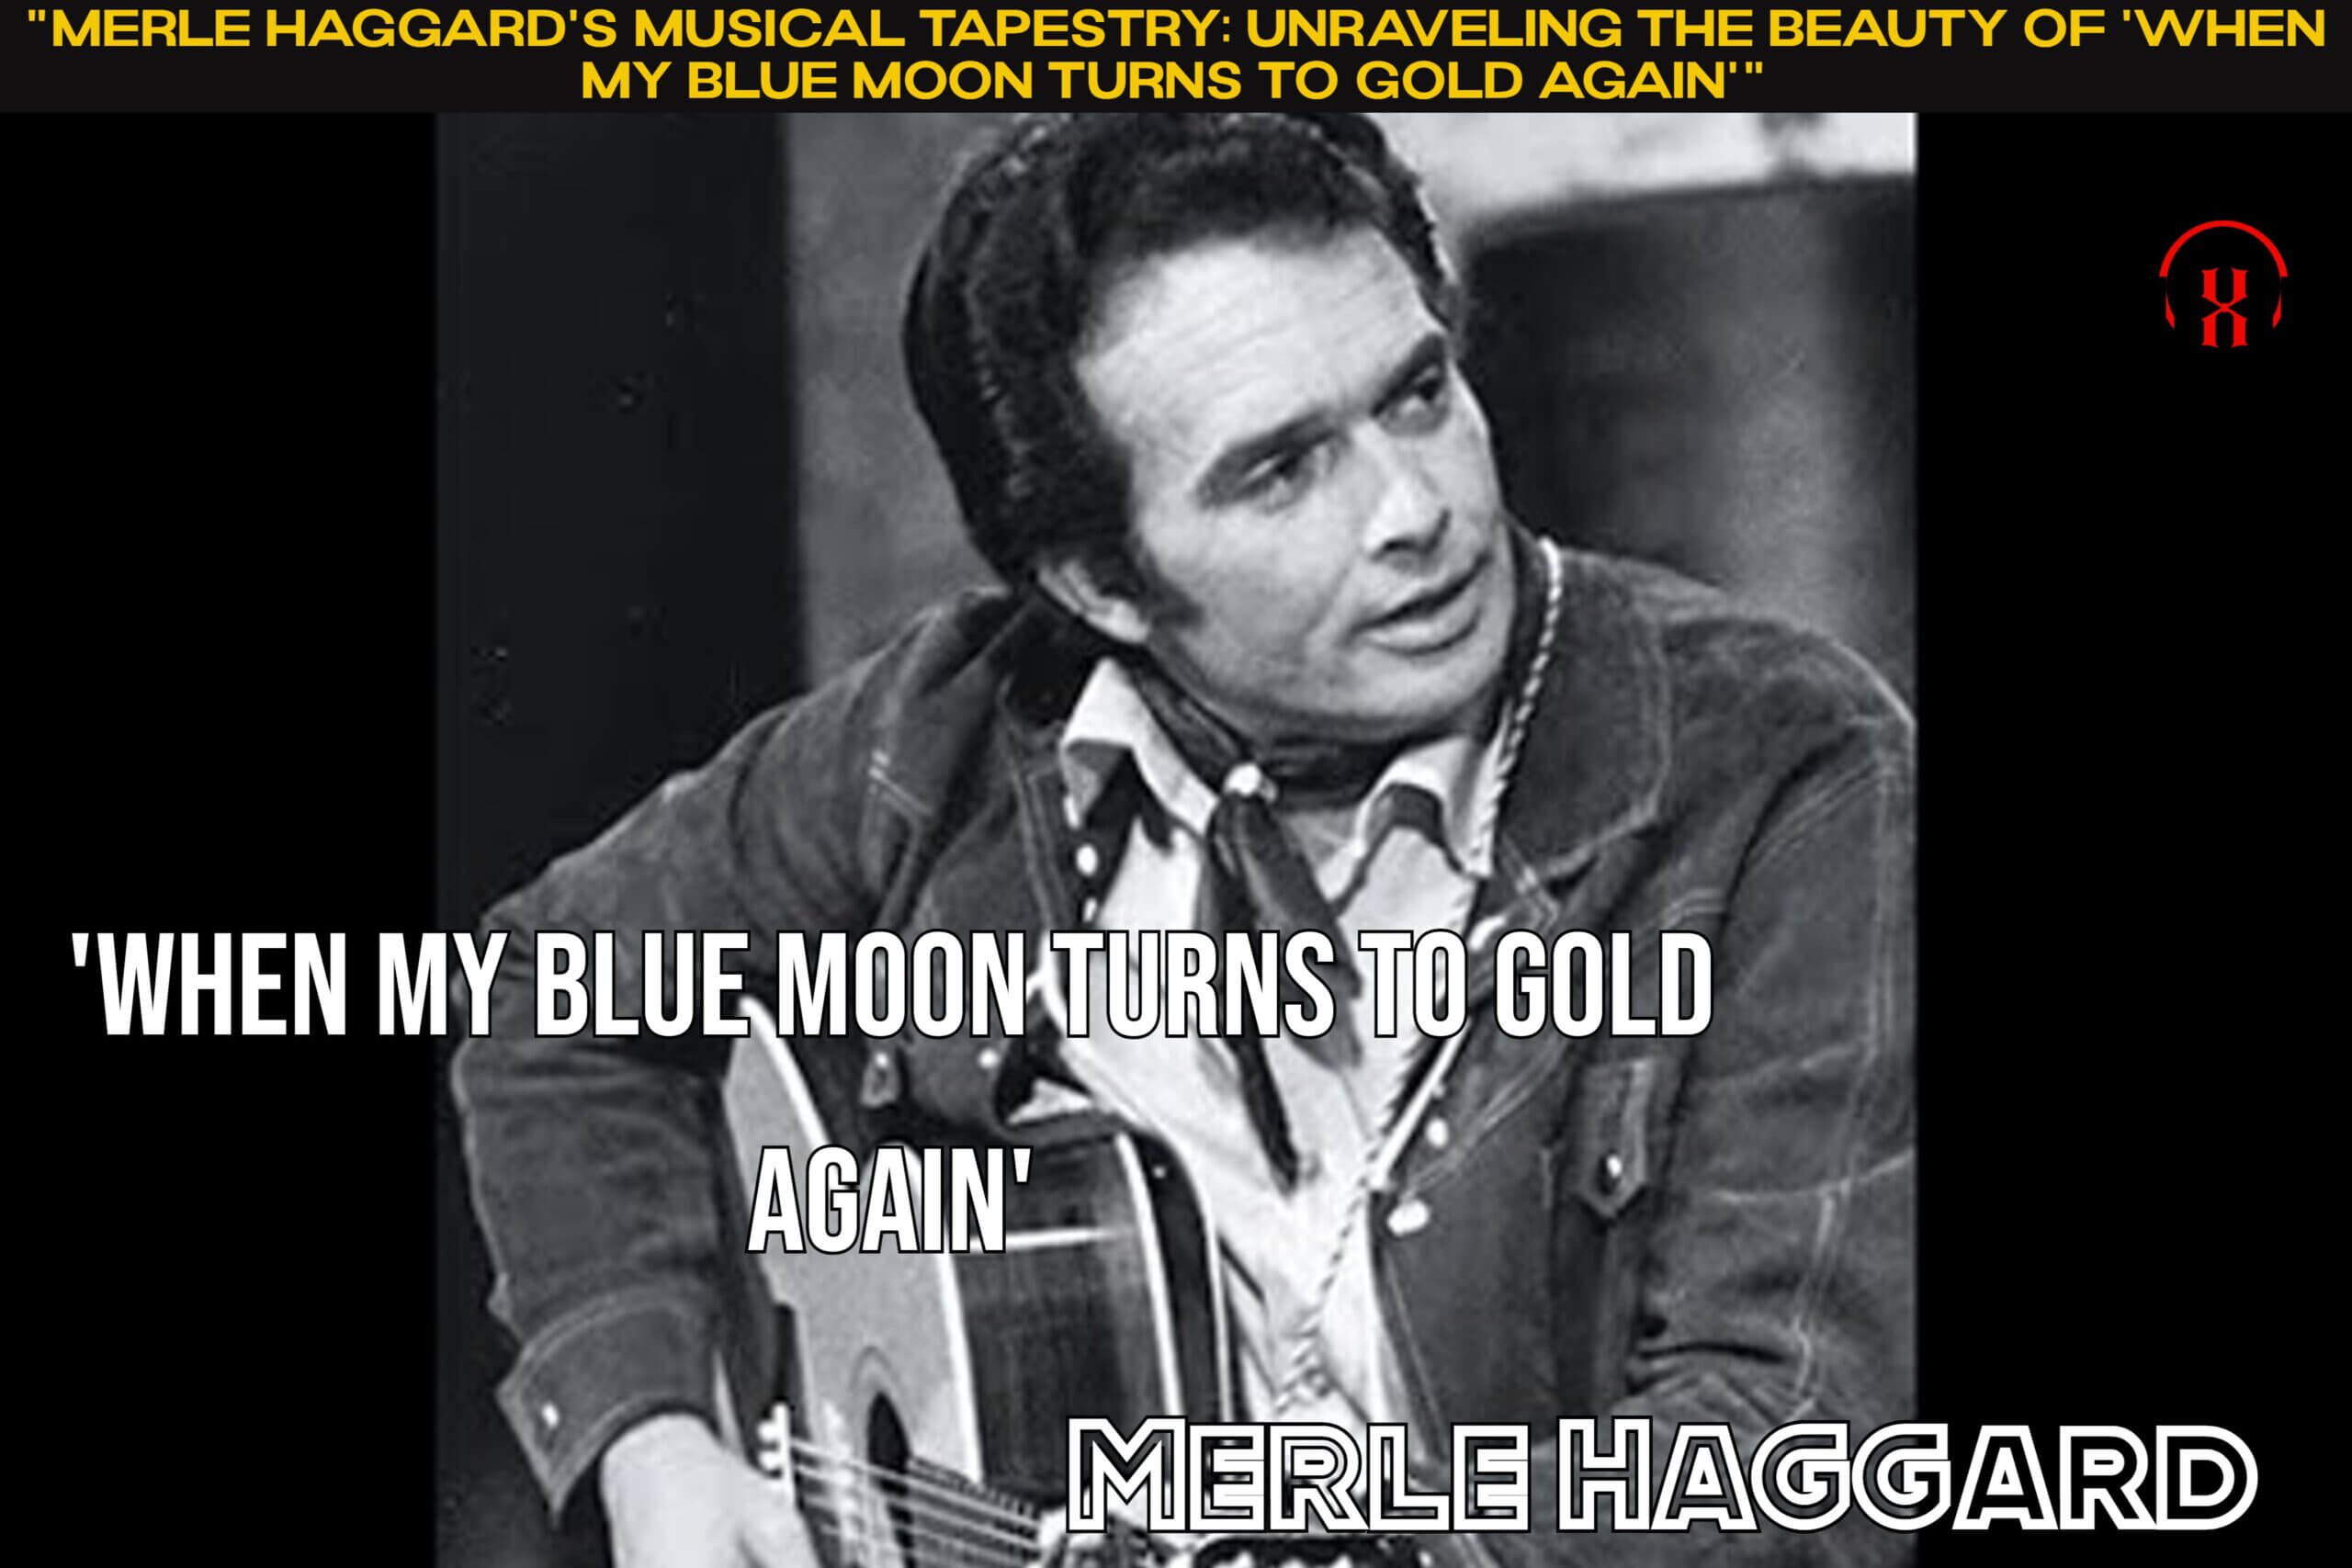 “Merle Haggard’s Musical Tapestry: Unraveling the Beauty of ‘When My Blue Moon Turns to Gold Again'”